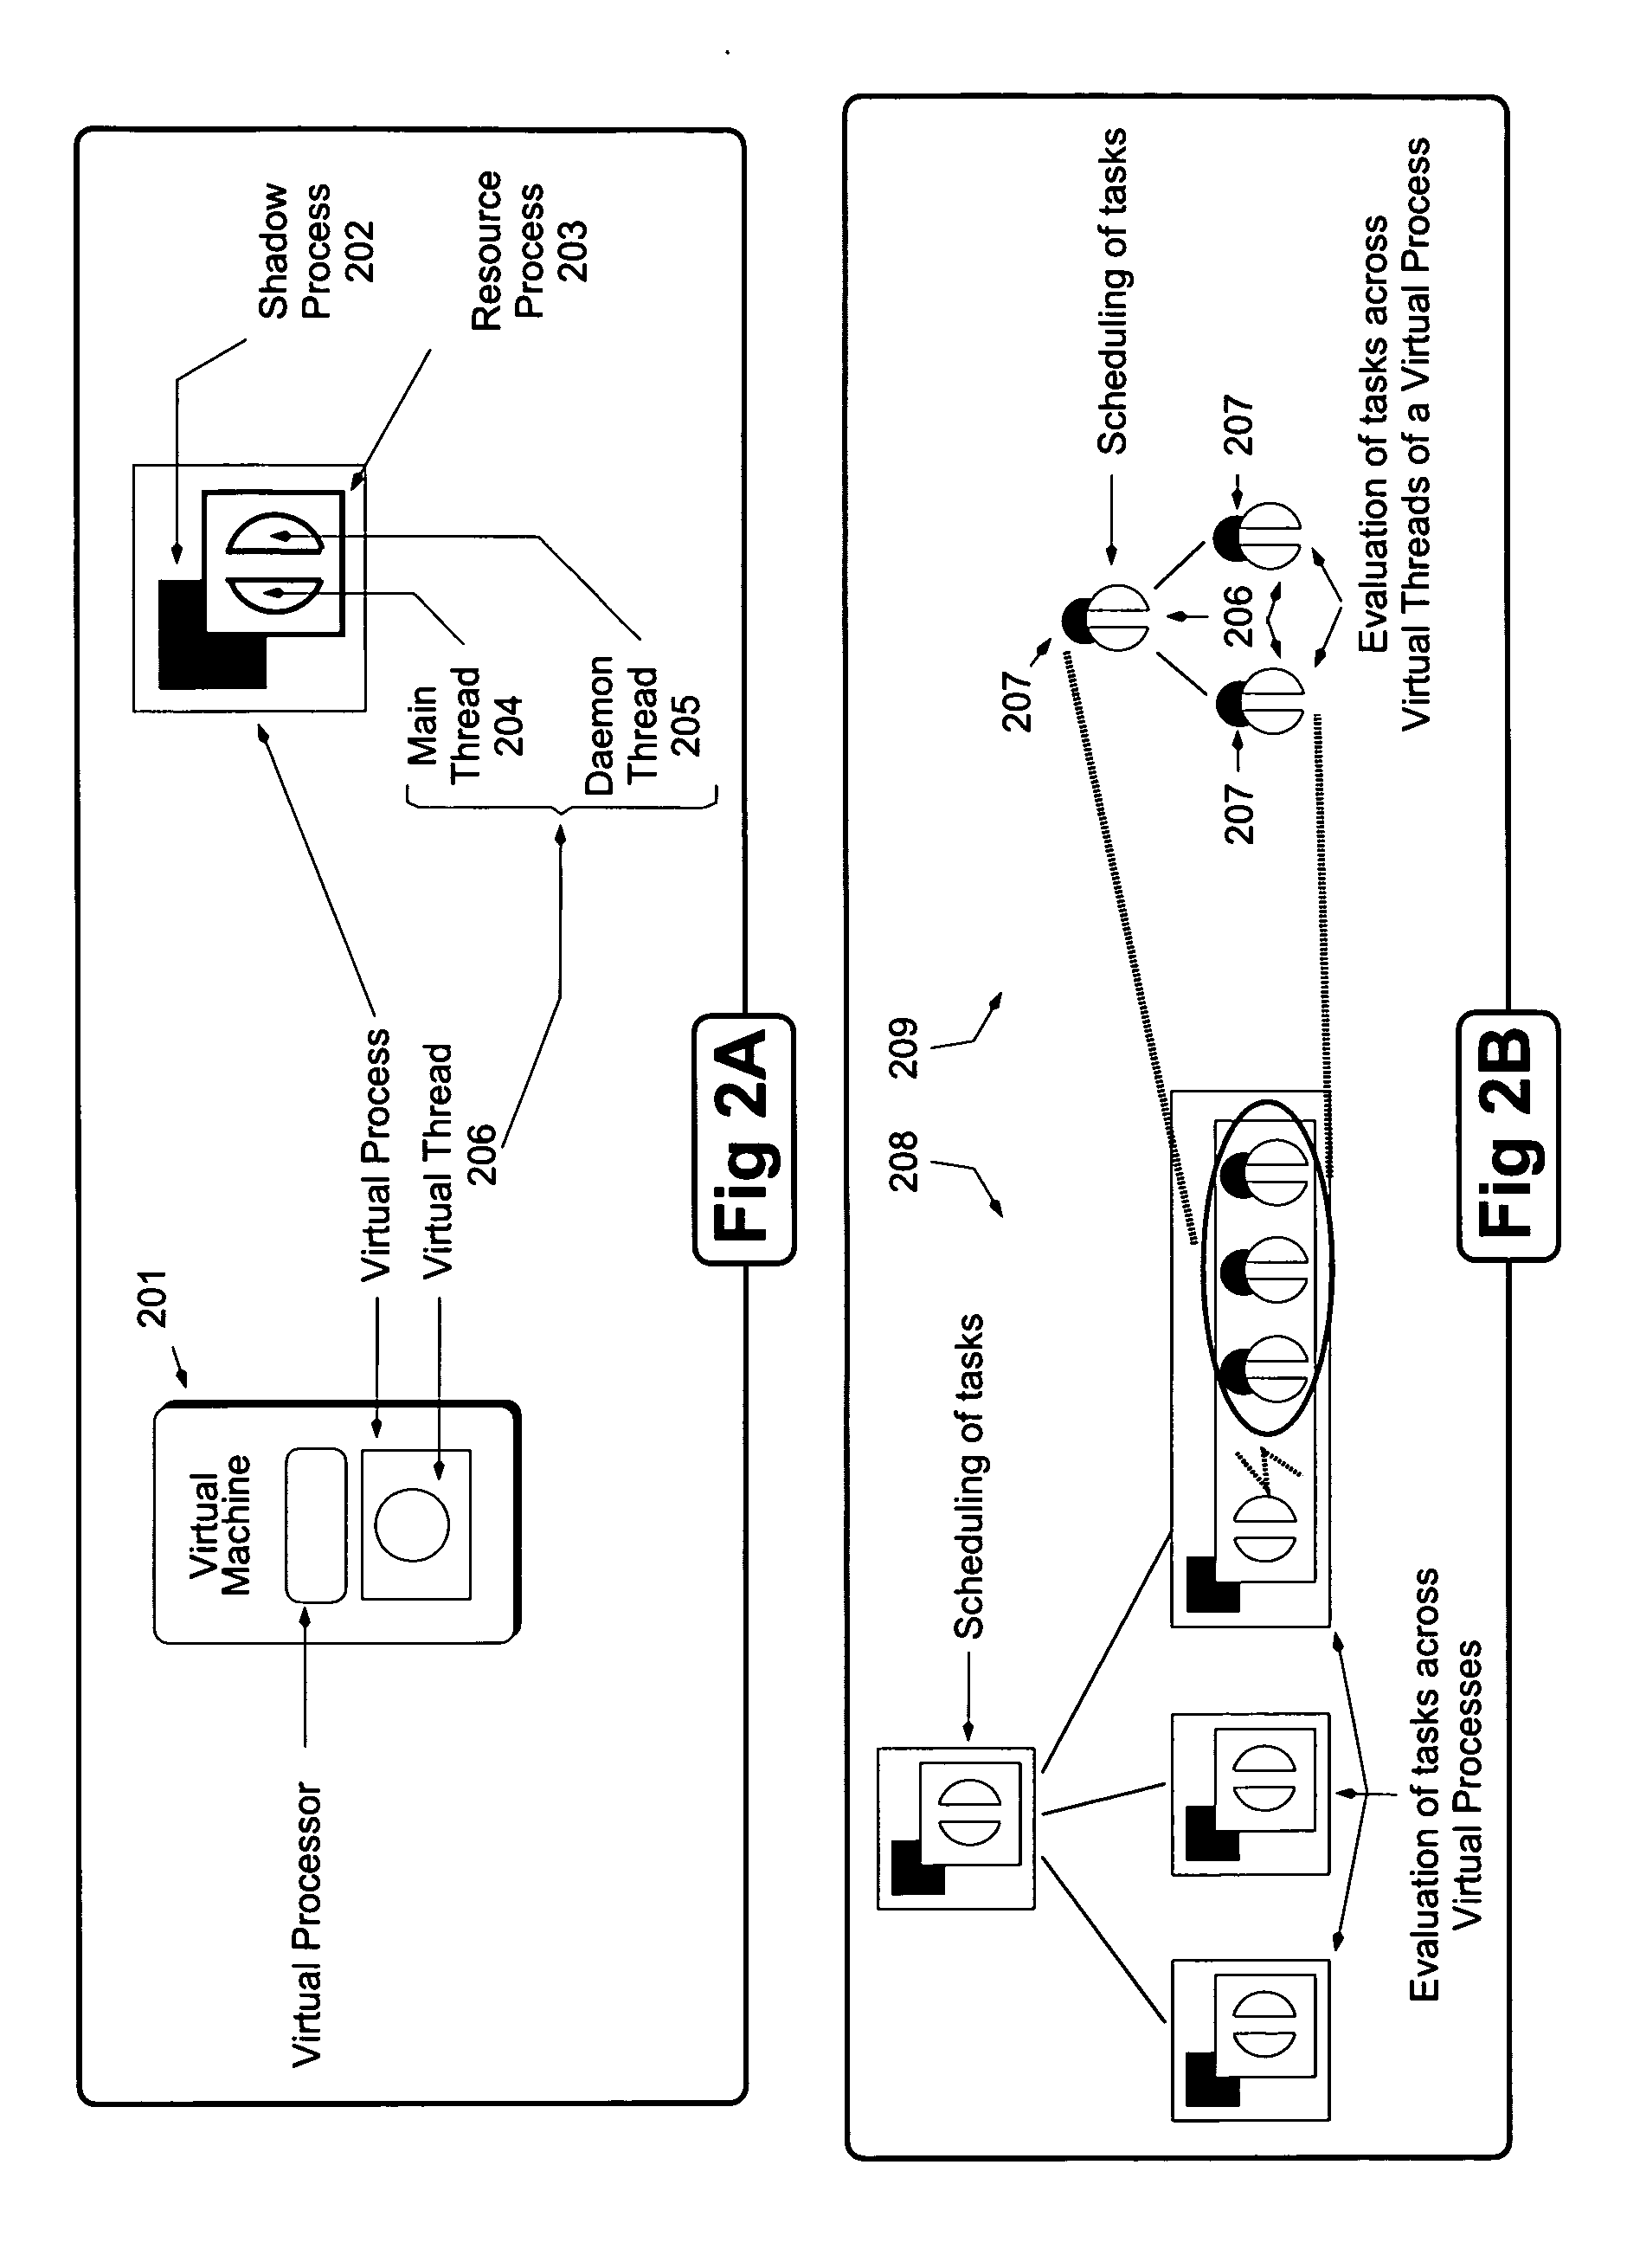 Resource tracking method and apparatus